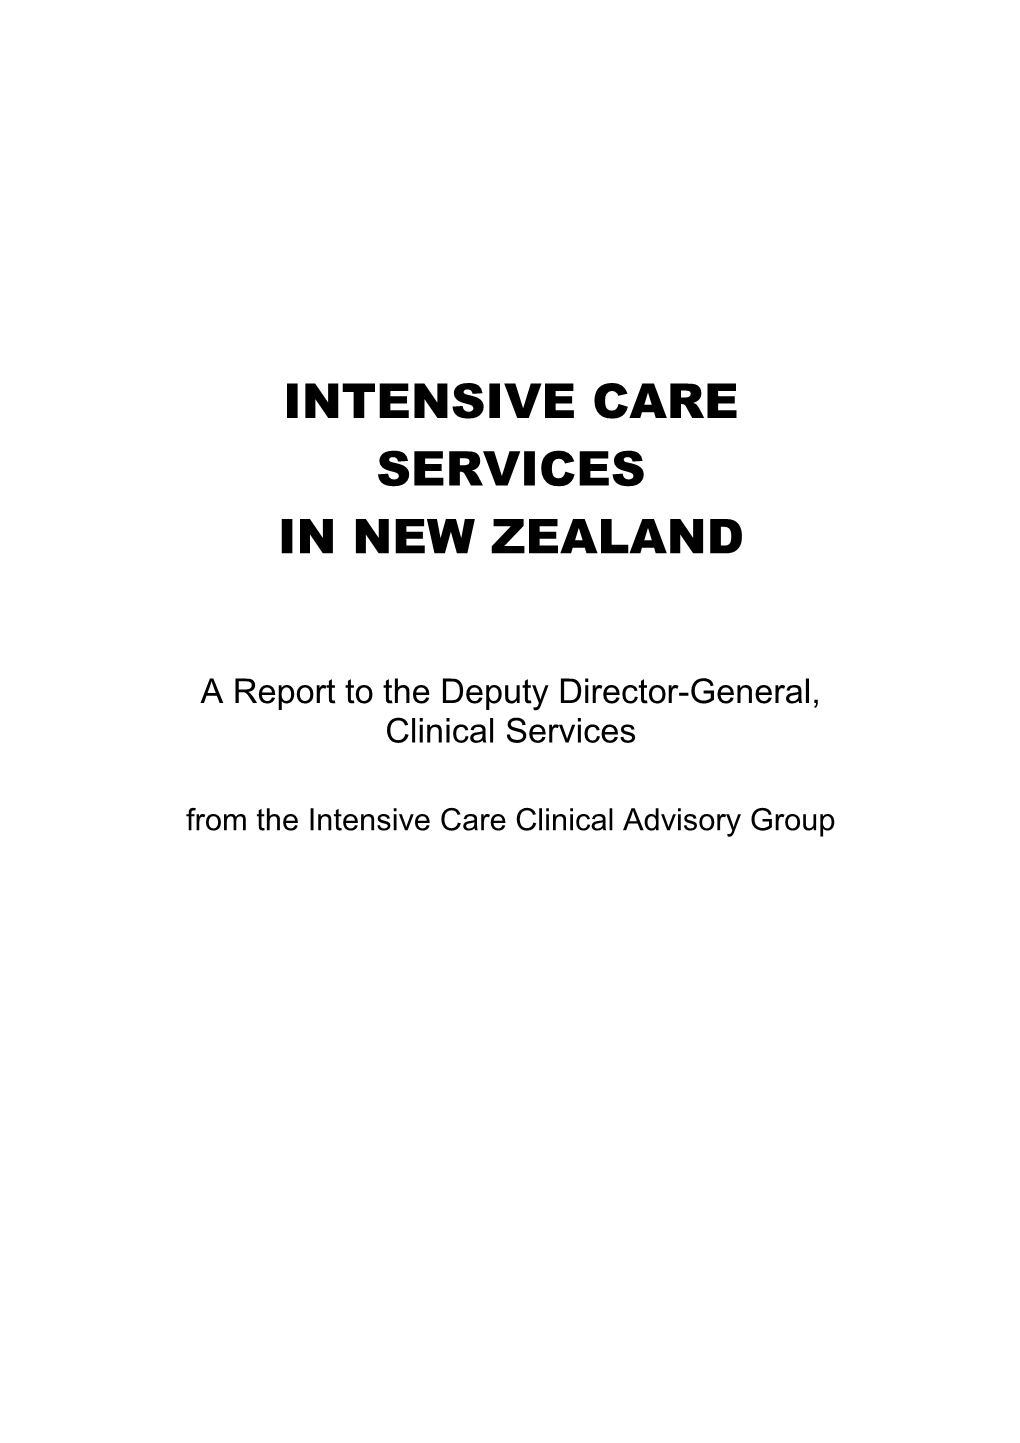 A Report to the Deputy Director-General, Clinical Services